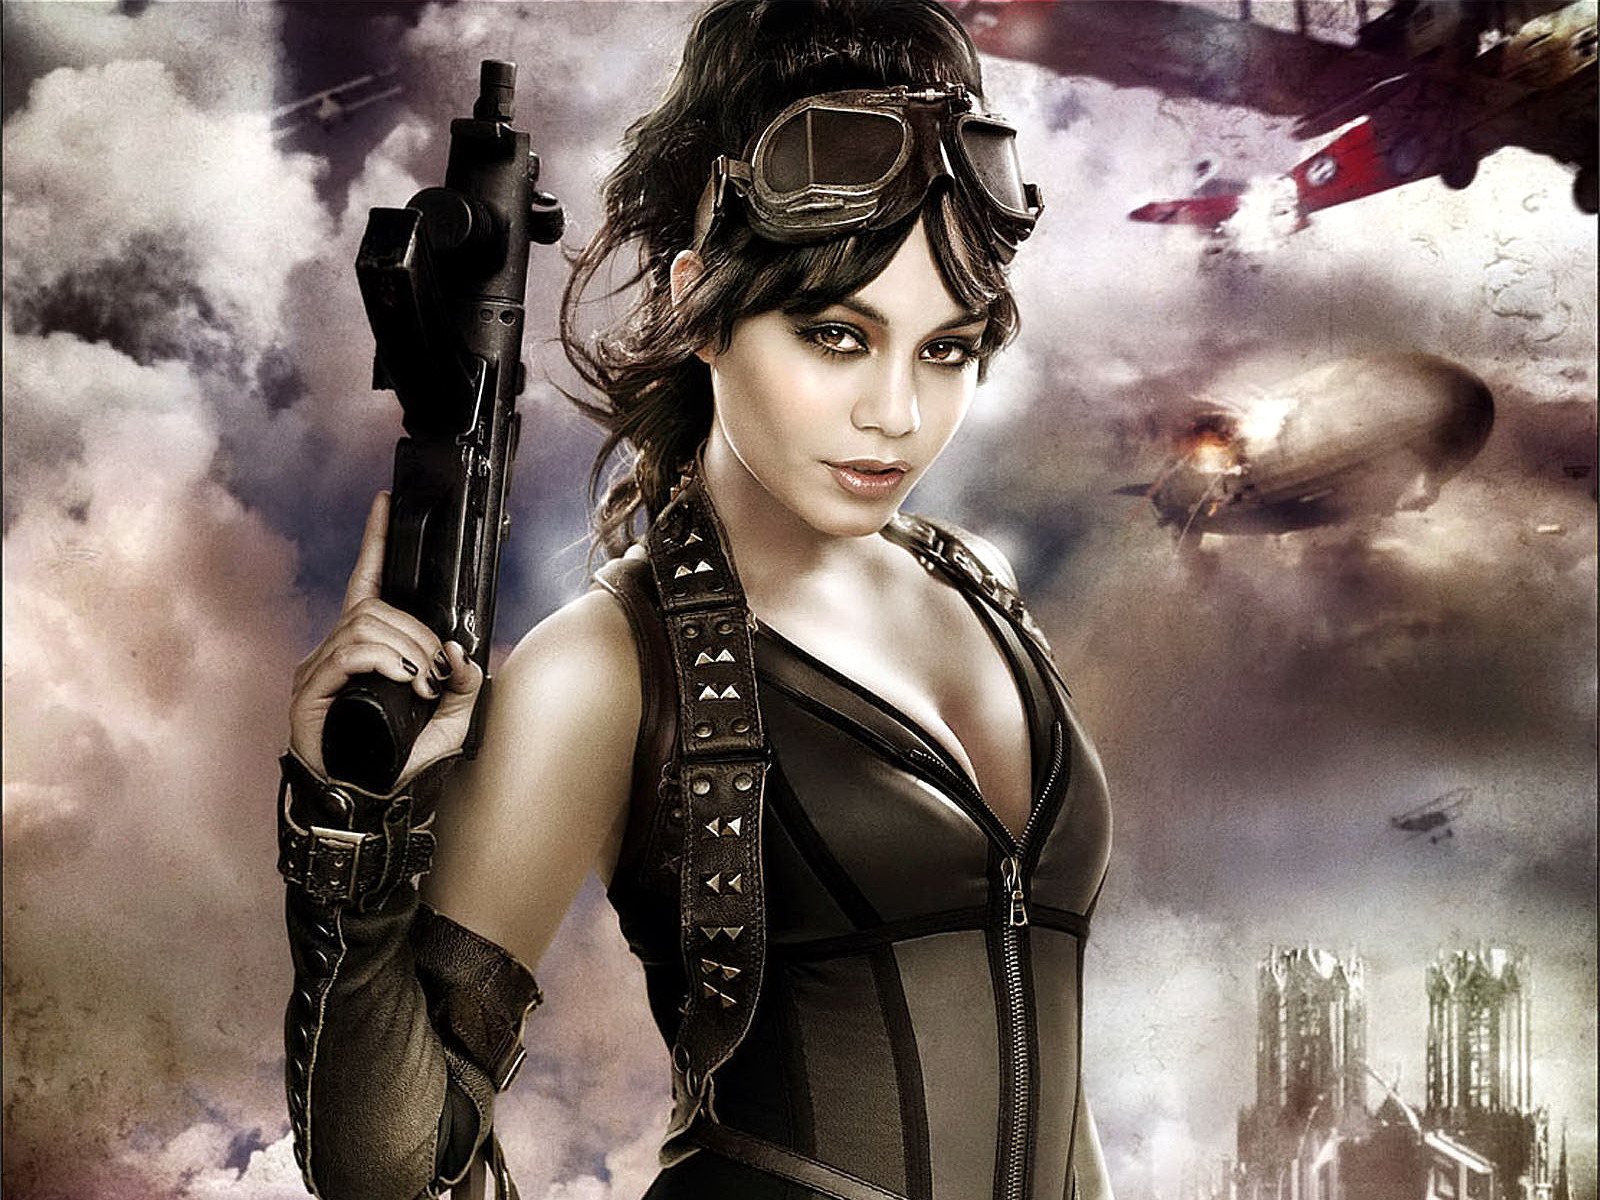 Sucker Punch movie poster featuring Vanessa Hudgens, a stylish and captivating character.